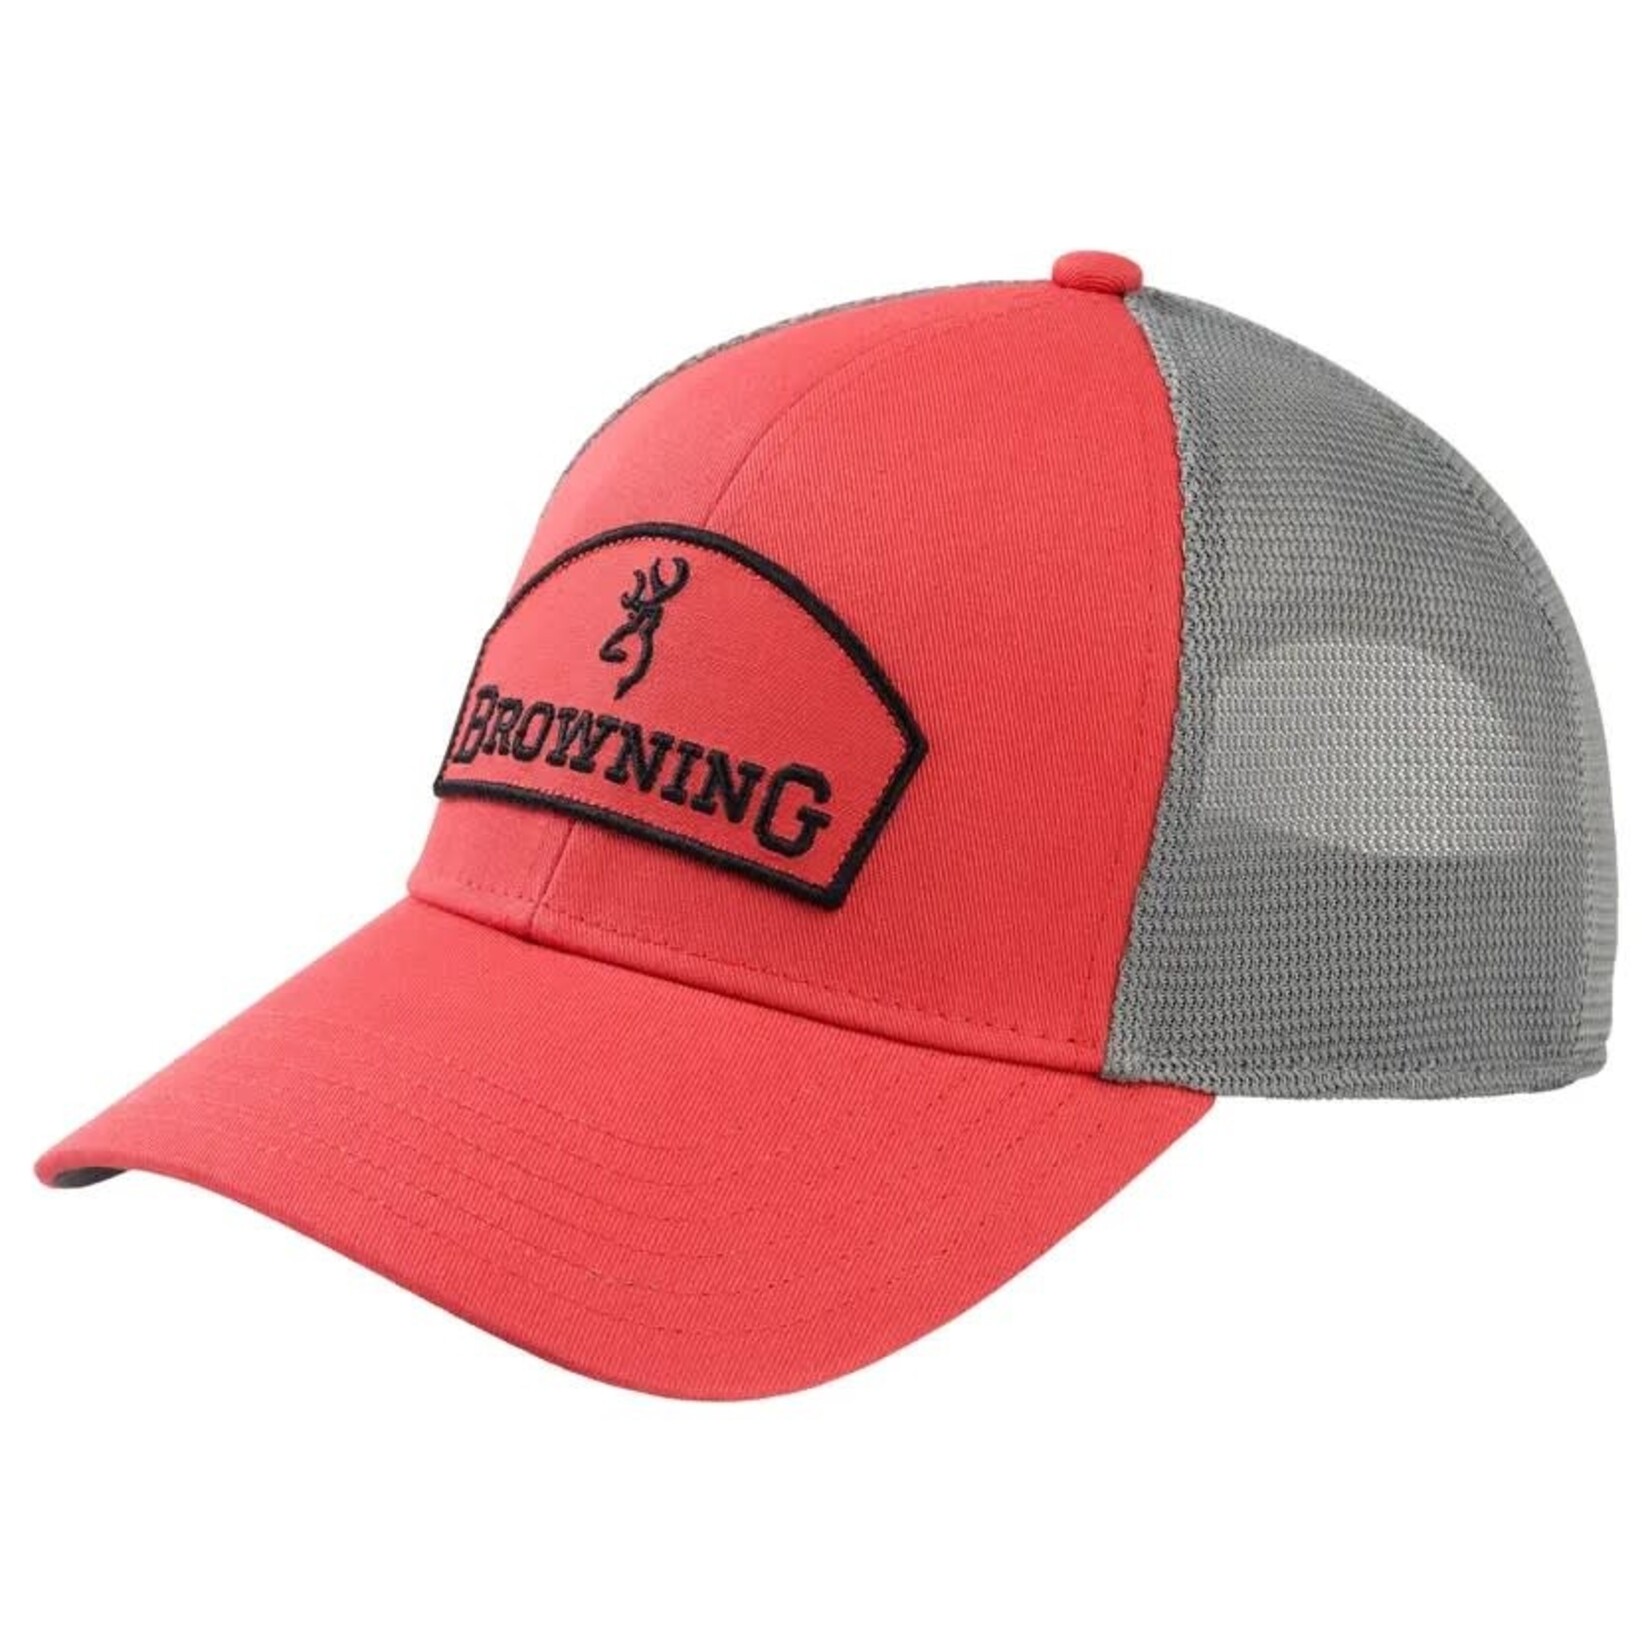 BROWNING Casquette Browning Emblem Corail